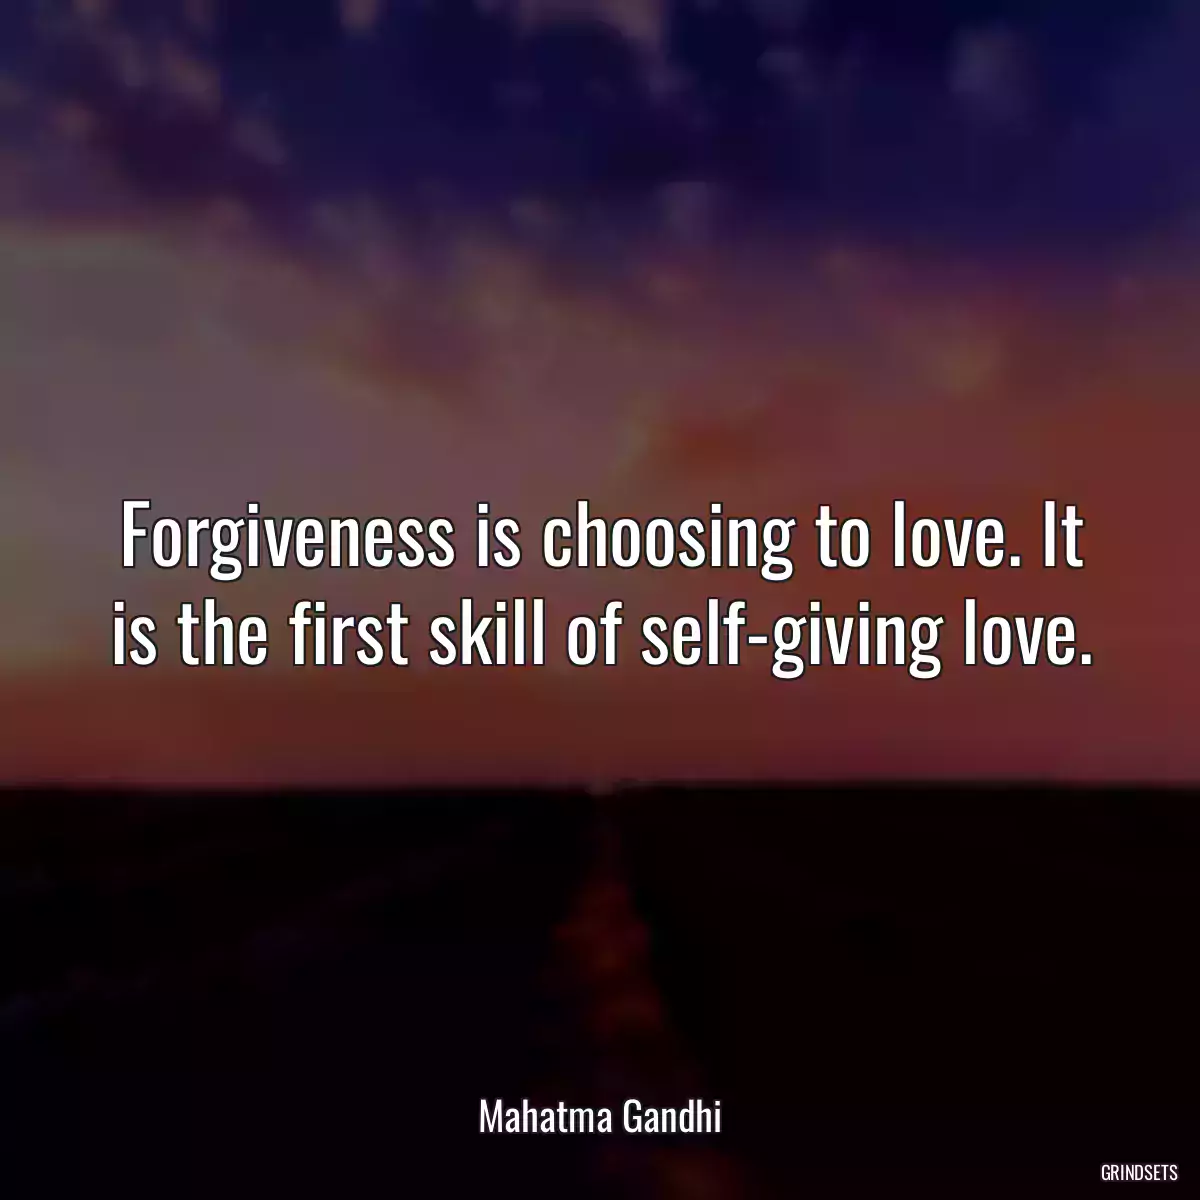 Forgiveness is choosing to love. It is the first skill of self-giving love.